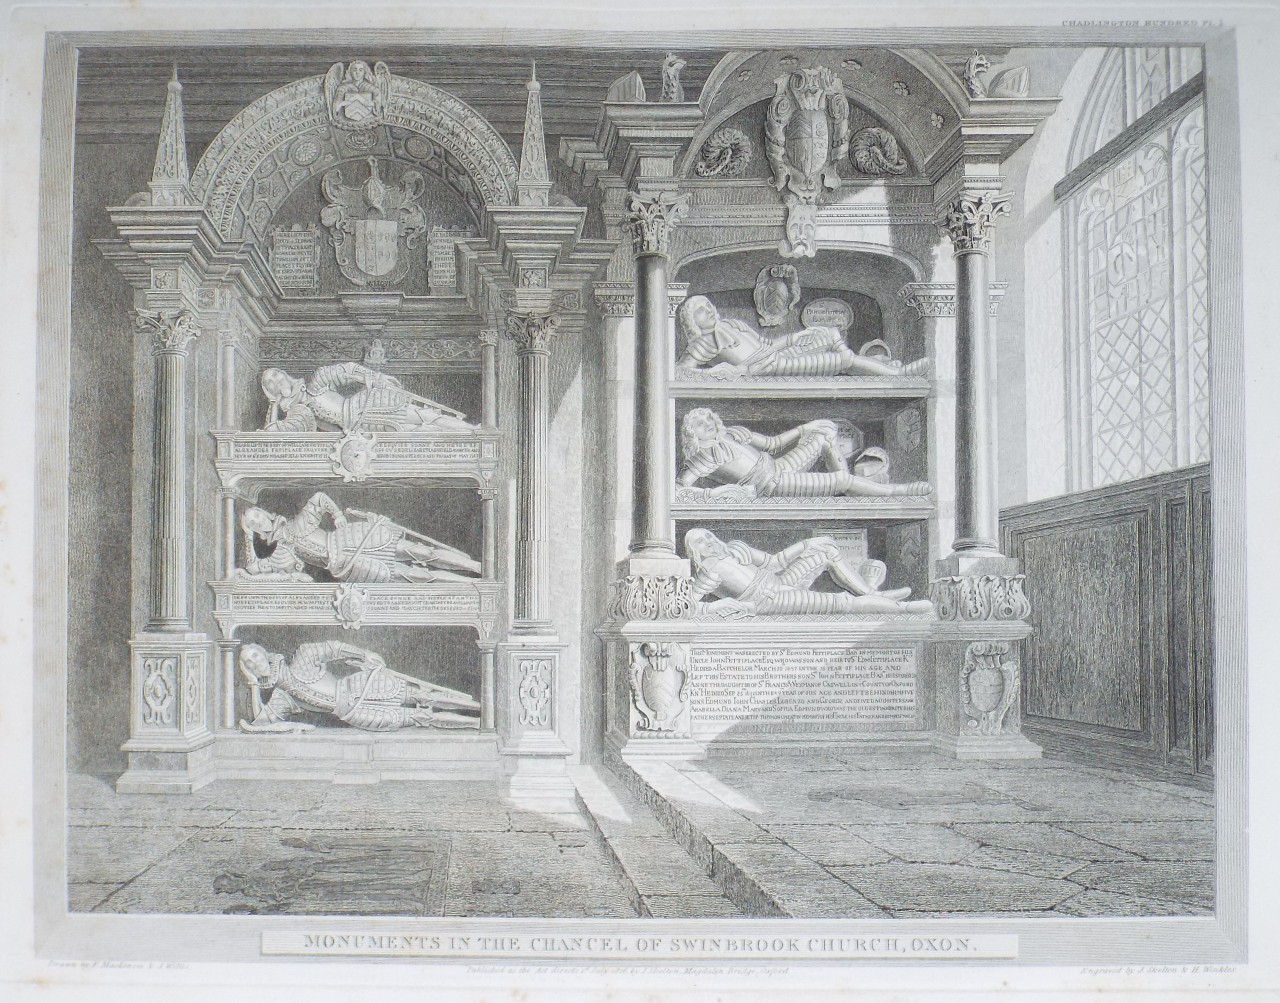 Print - Monuments in the Chancel of Swinbrook Church, Oxon. - Skelton